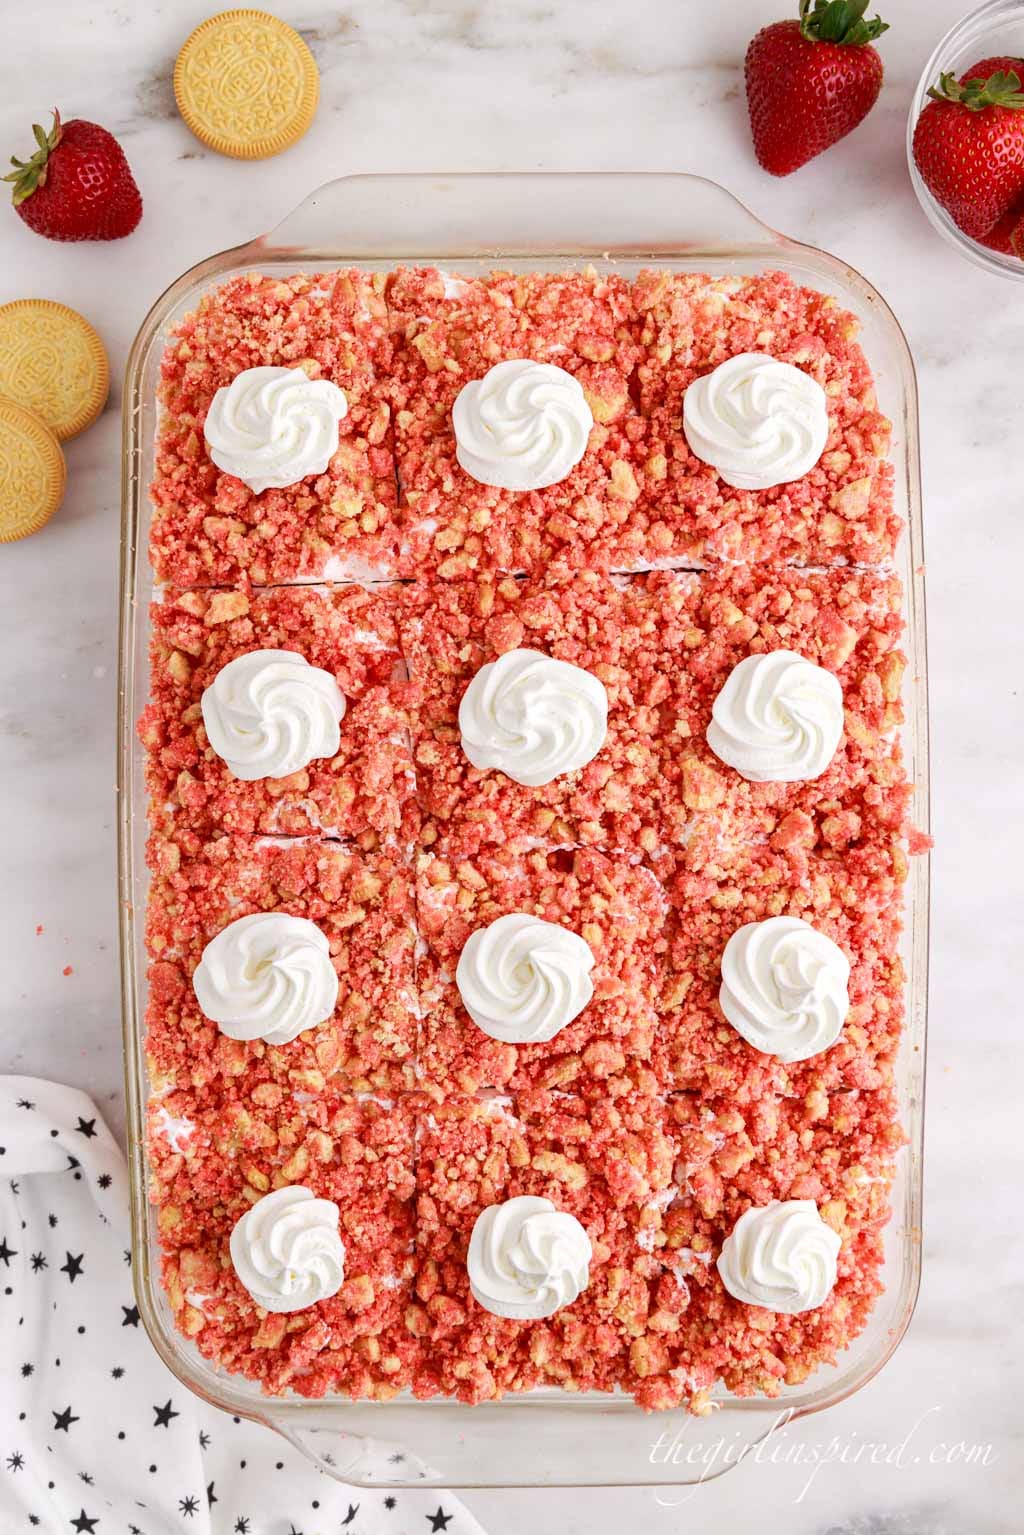 strawberry crunch poke cake sliced into 12 even pieces with a swirl of whipped cream on top of each section.